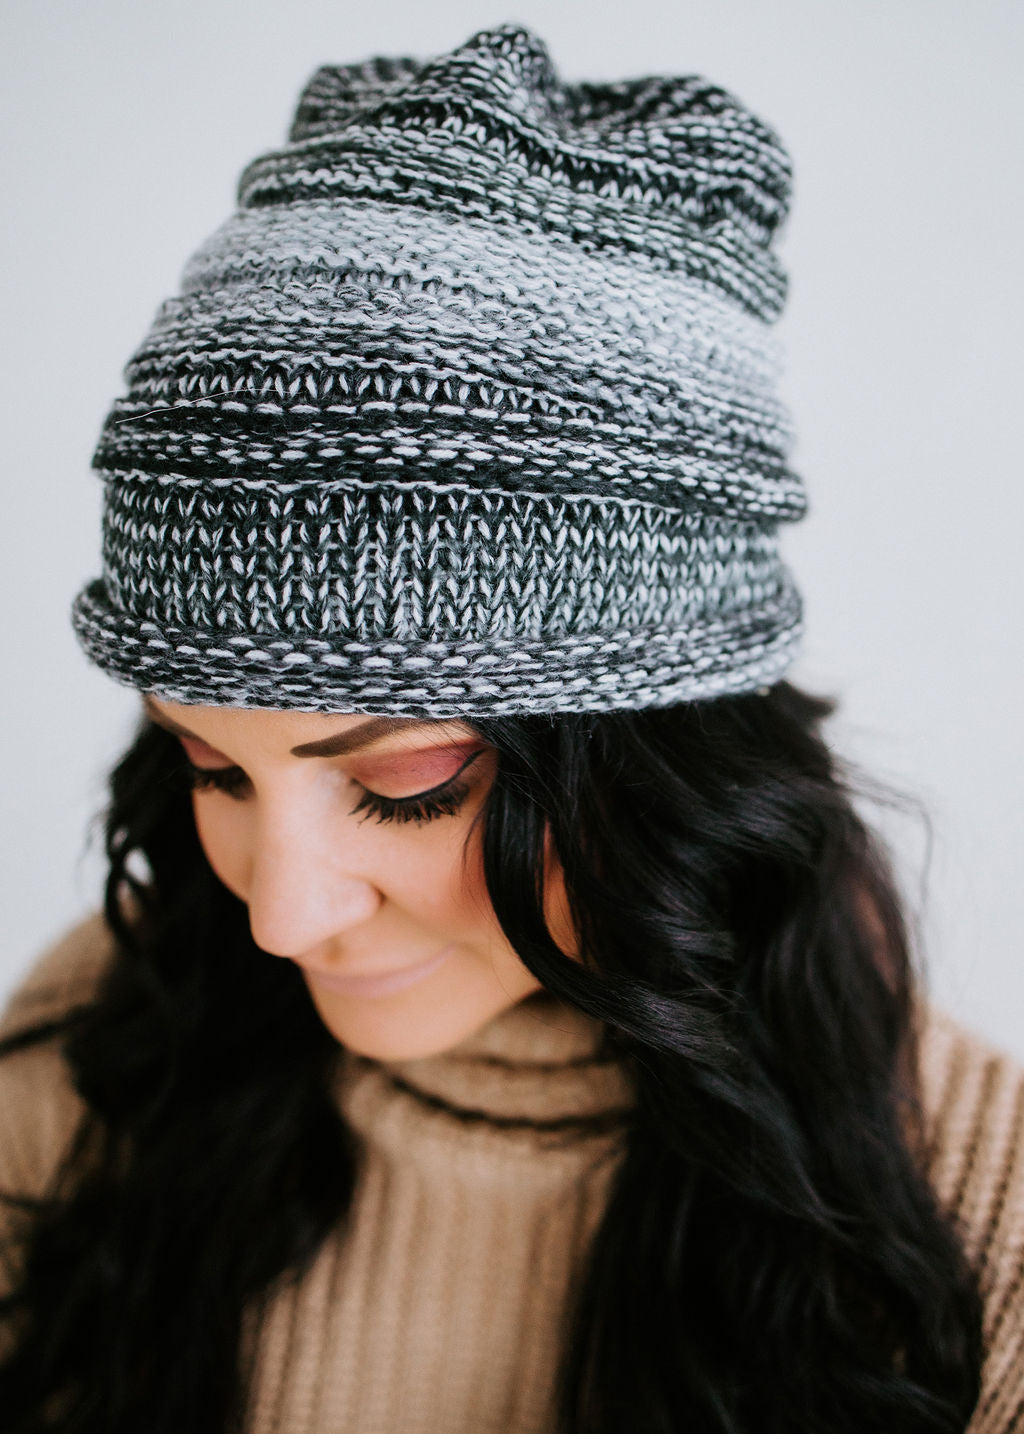 Philip Ruched Knitted Beanie FINAL SALE